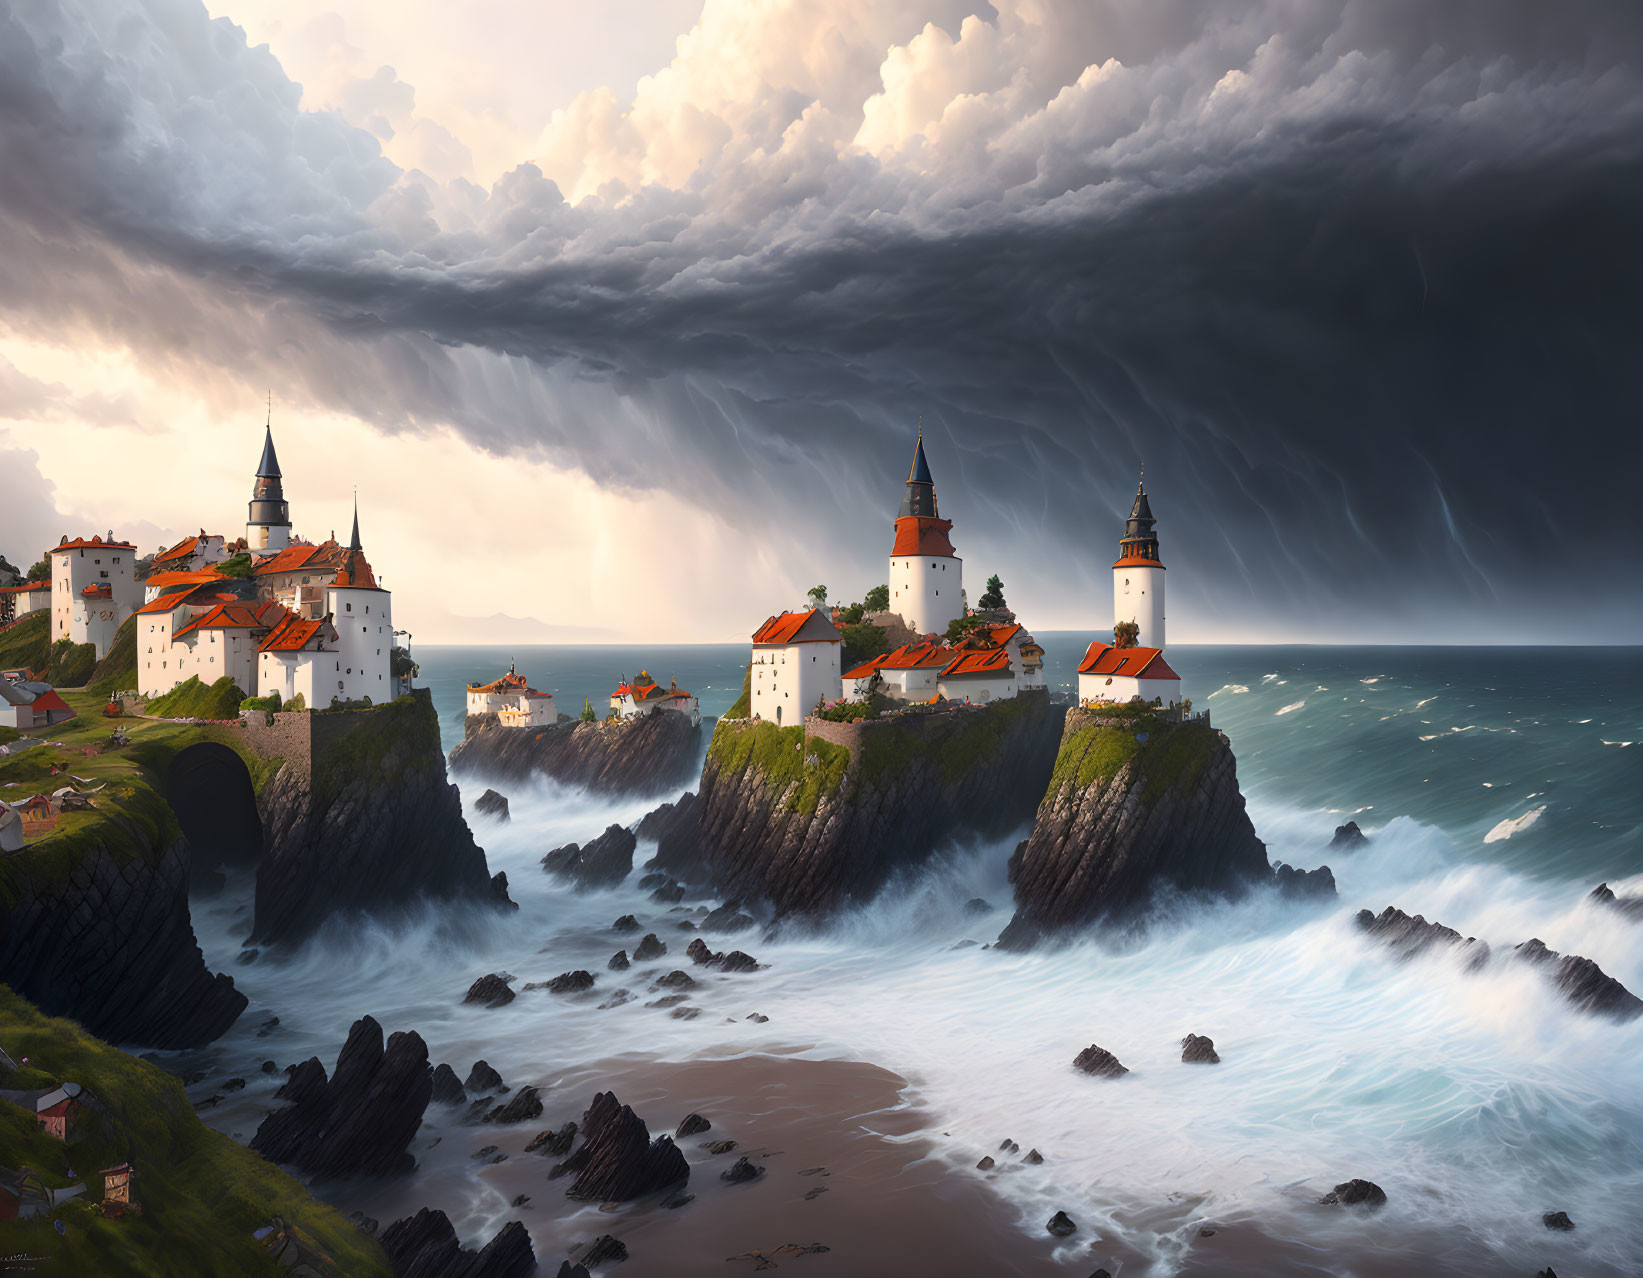 Fortified town and lighthouses on cliffs in stormy coastal scene